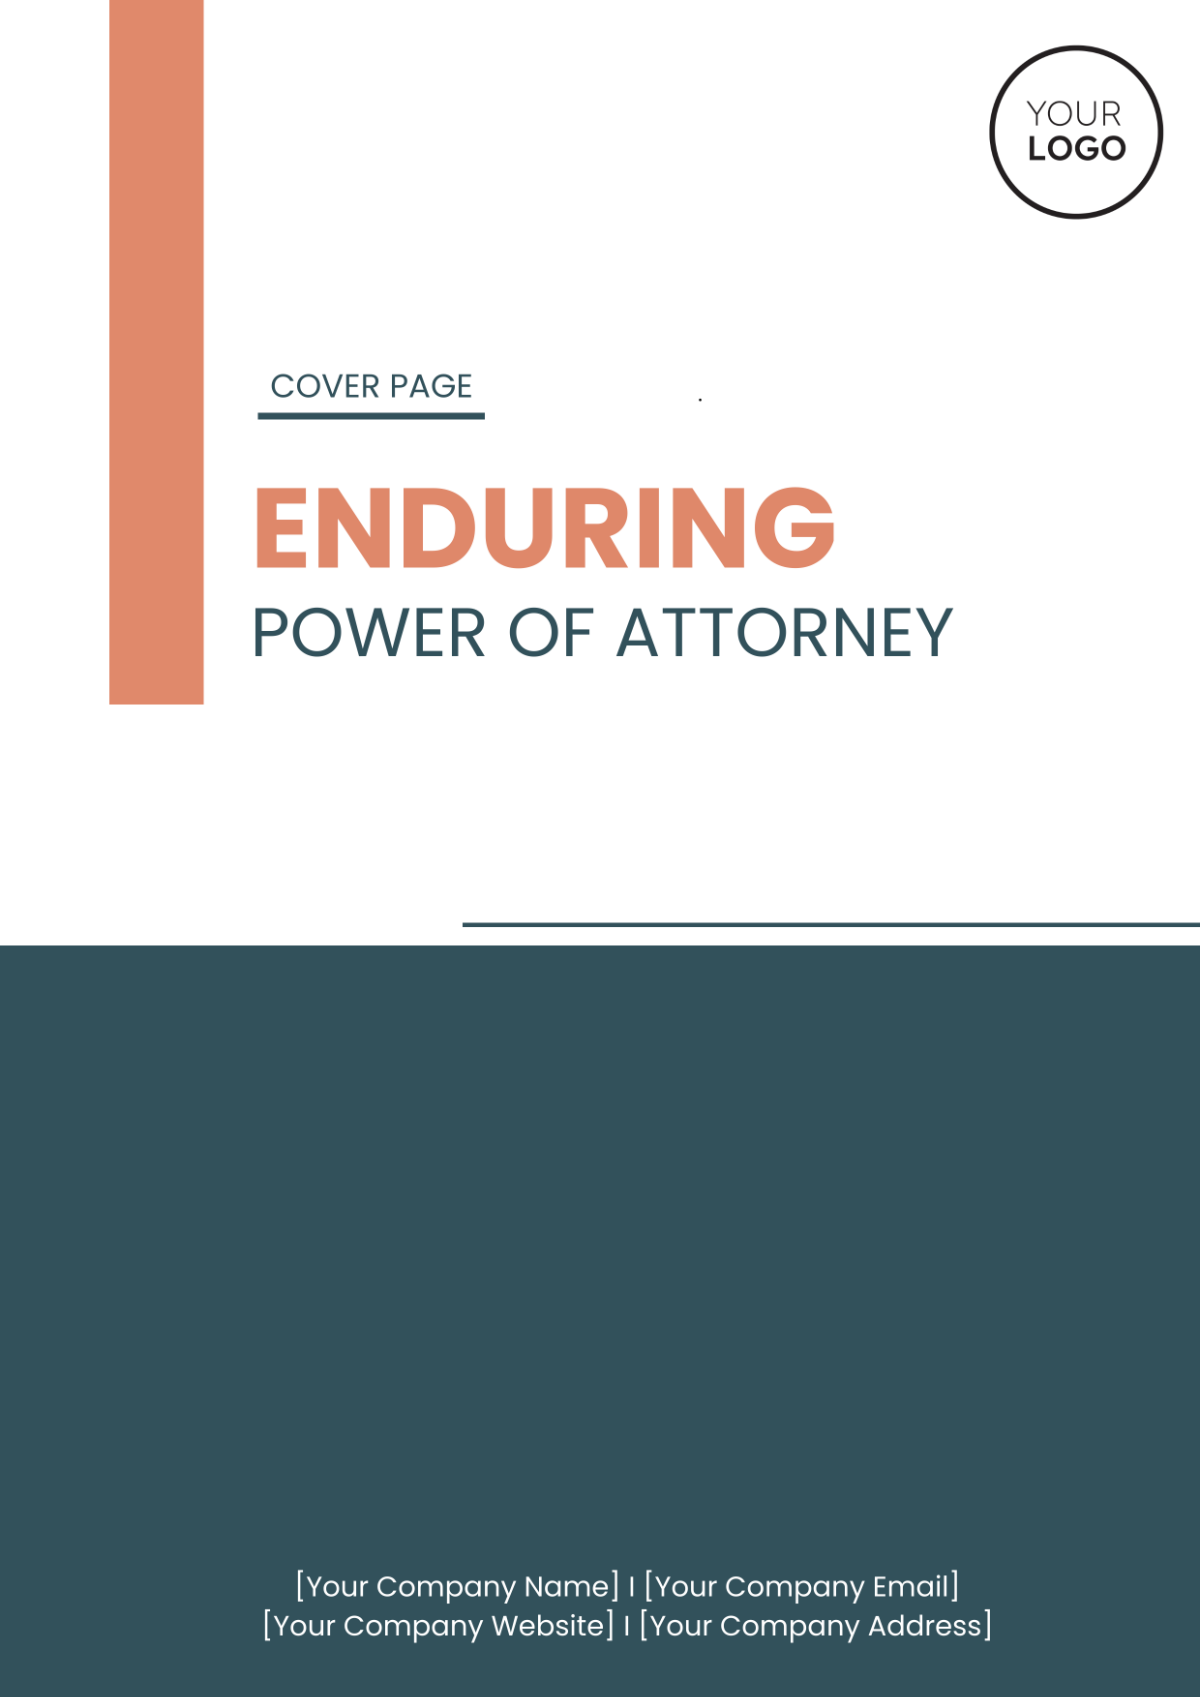 Enduring Power of Attorney Cover Page